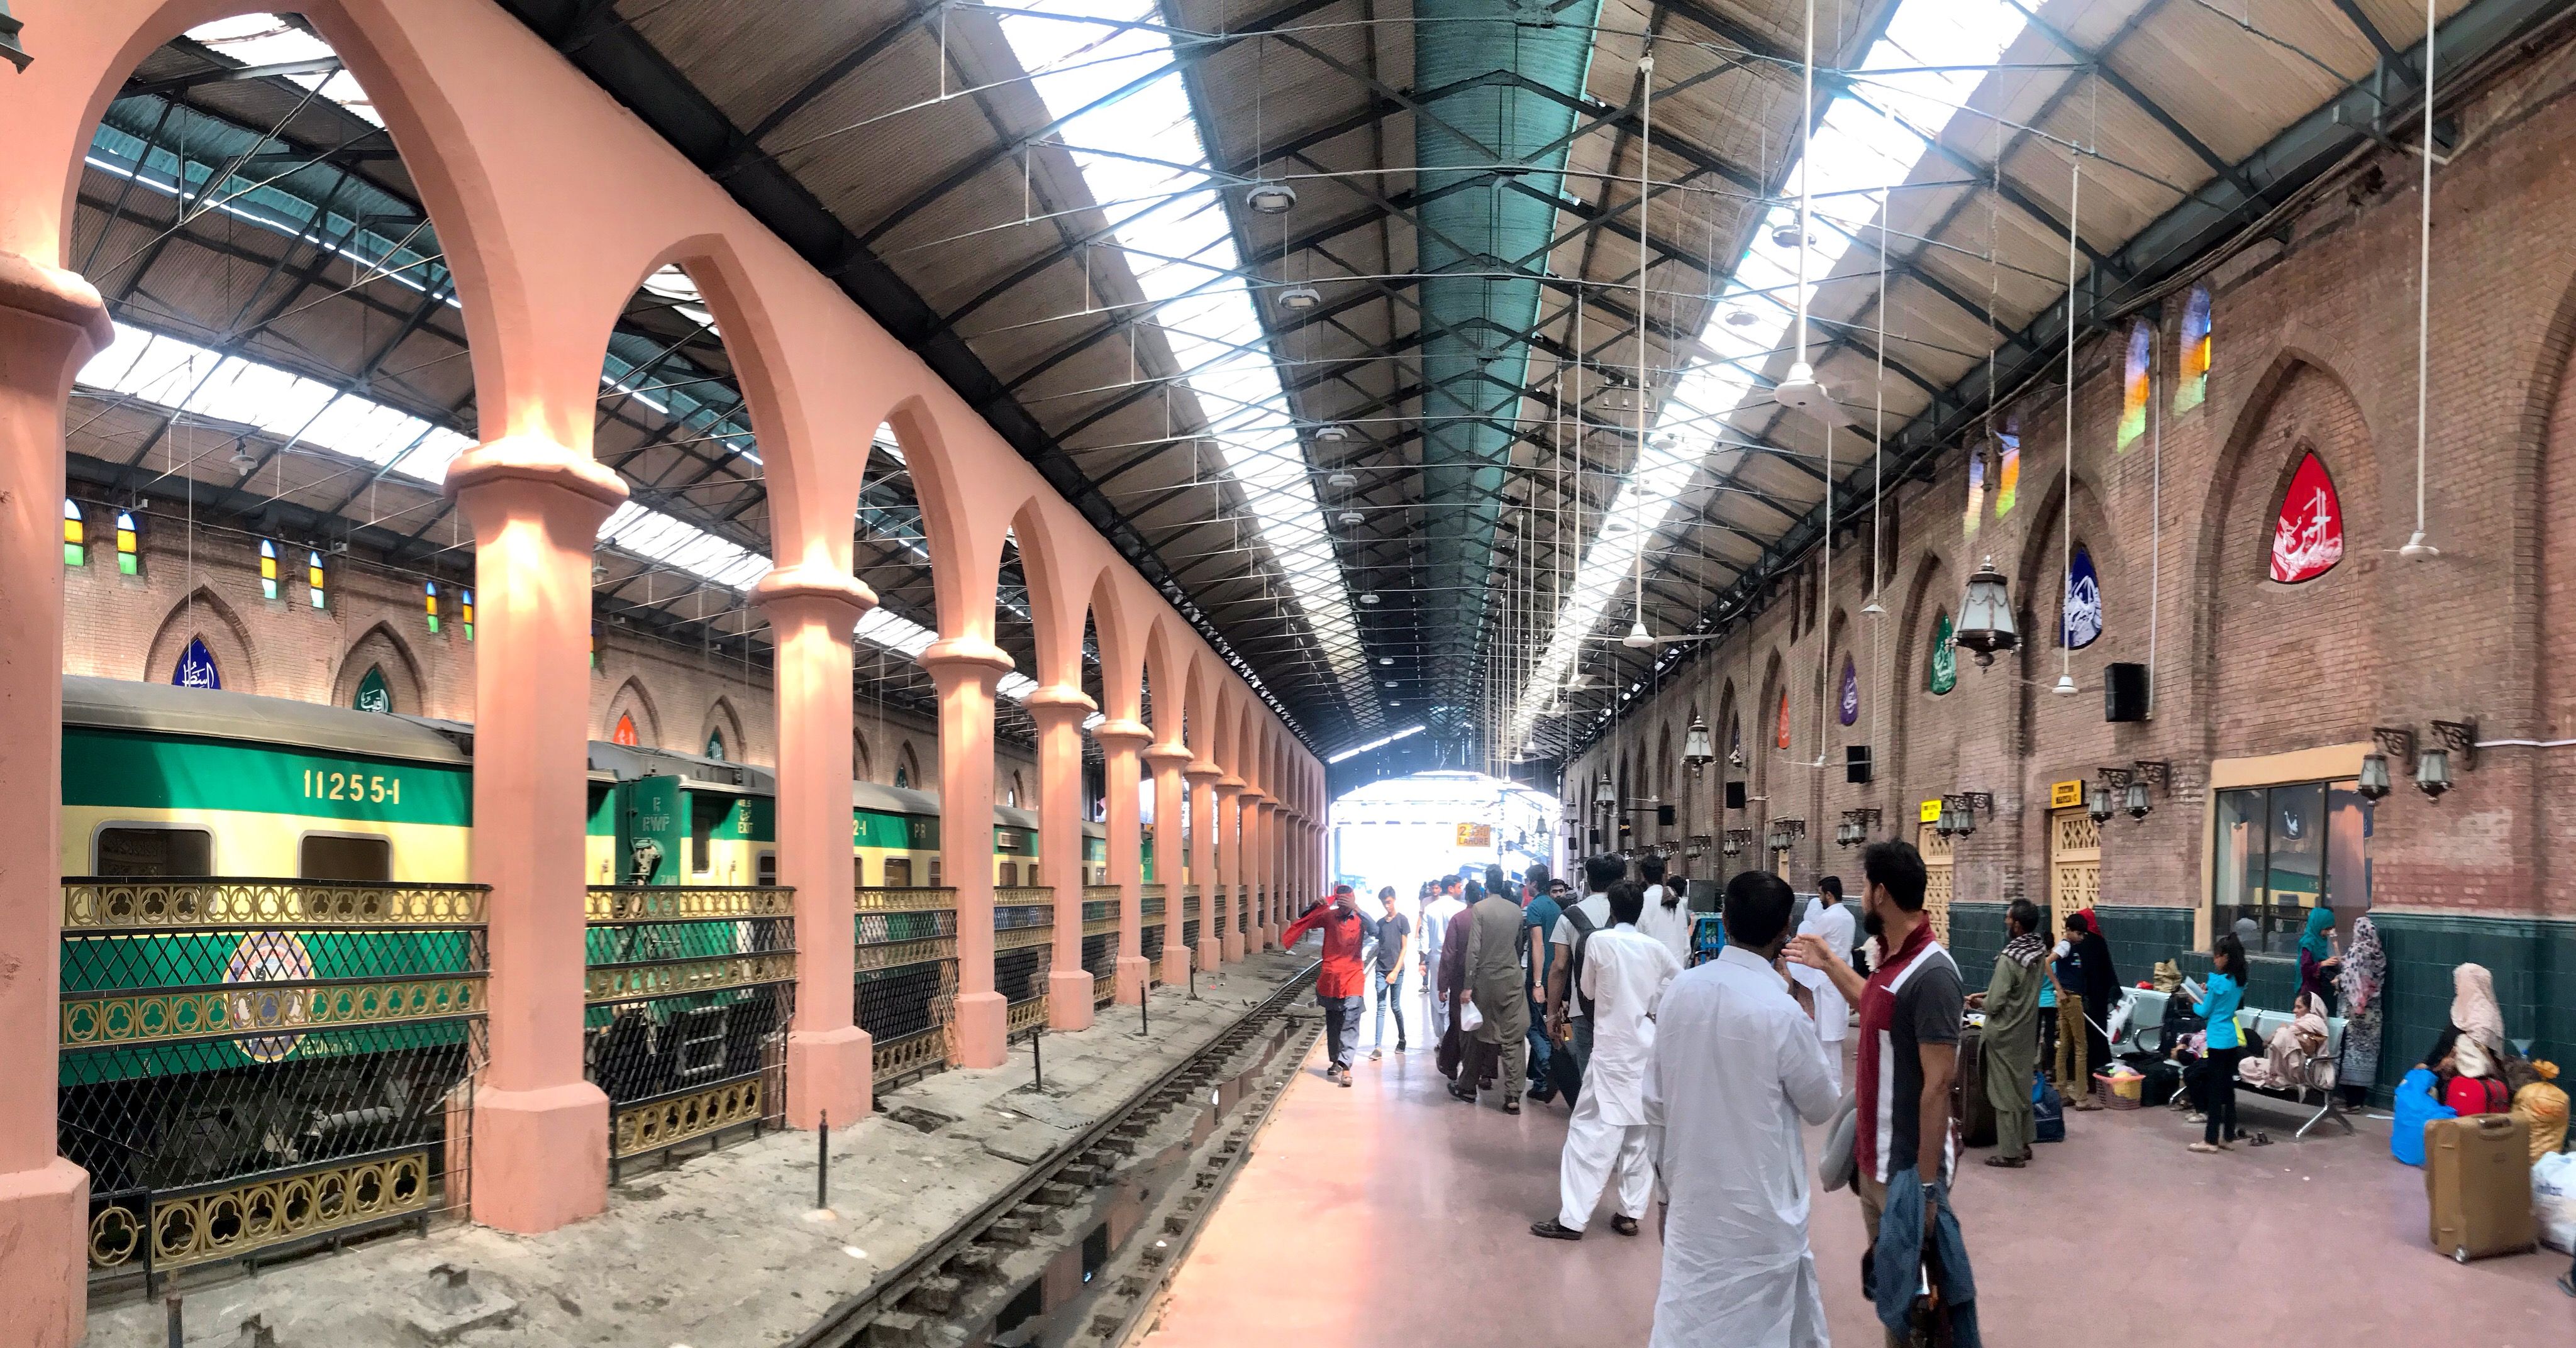 Railway Junction of Lahore, most historical Railway Station in Pakistan.